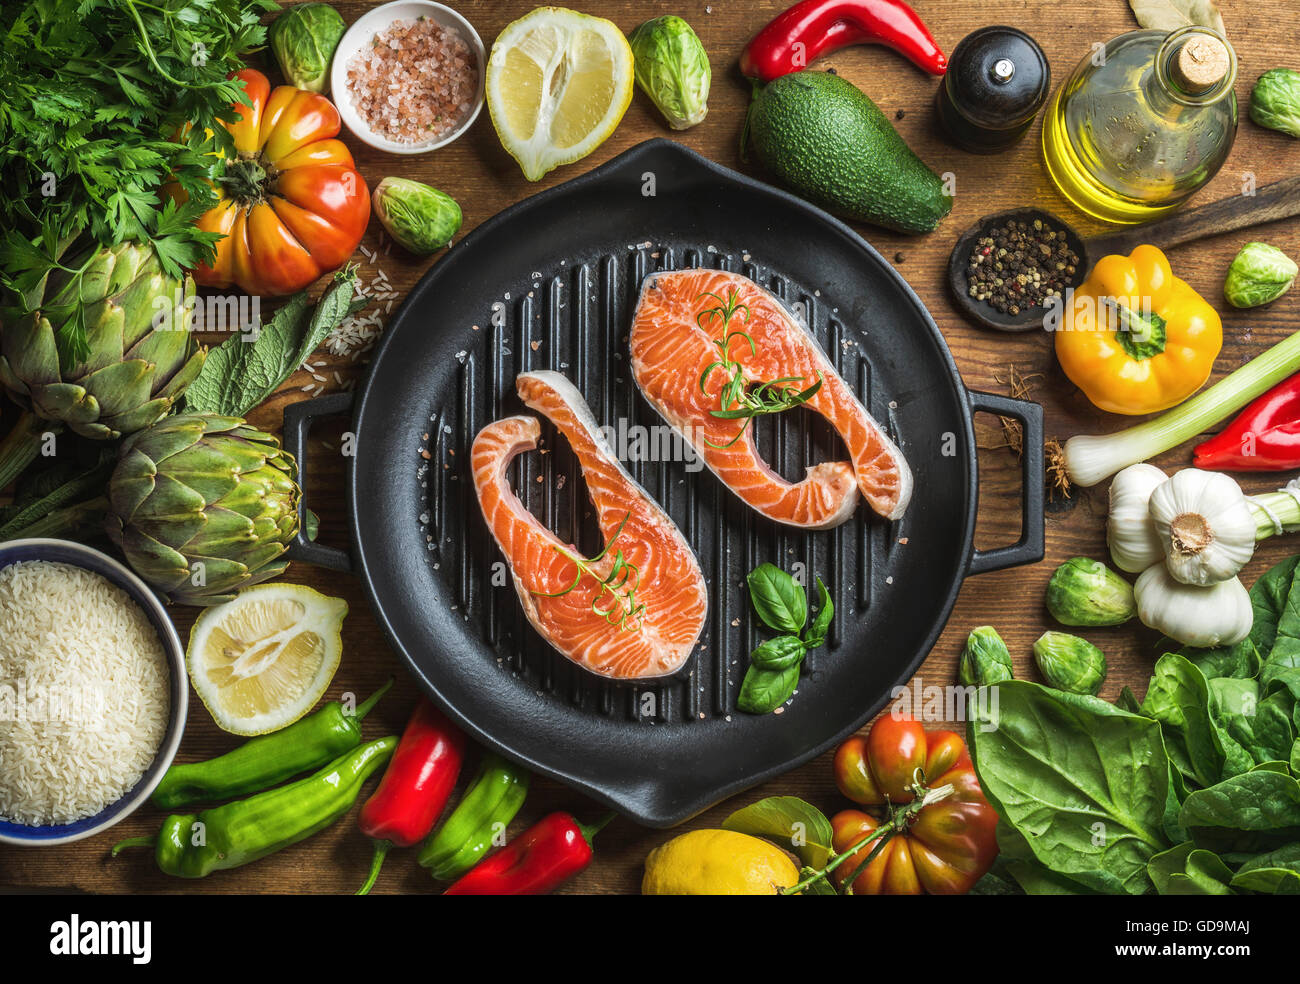 Raw uncooked salmon steakes with different vegetables, rice, herbs and spices on black grilling iron pan over rustic wooden back Stock Photo